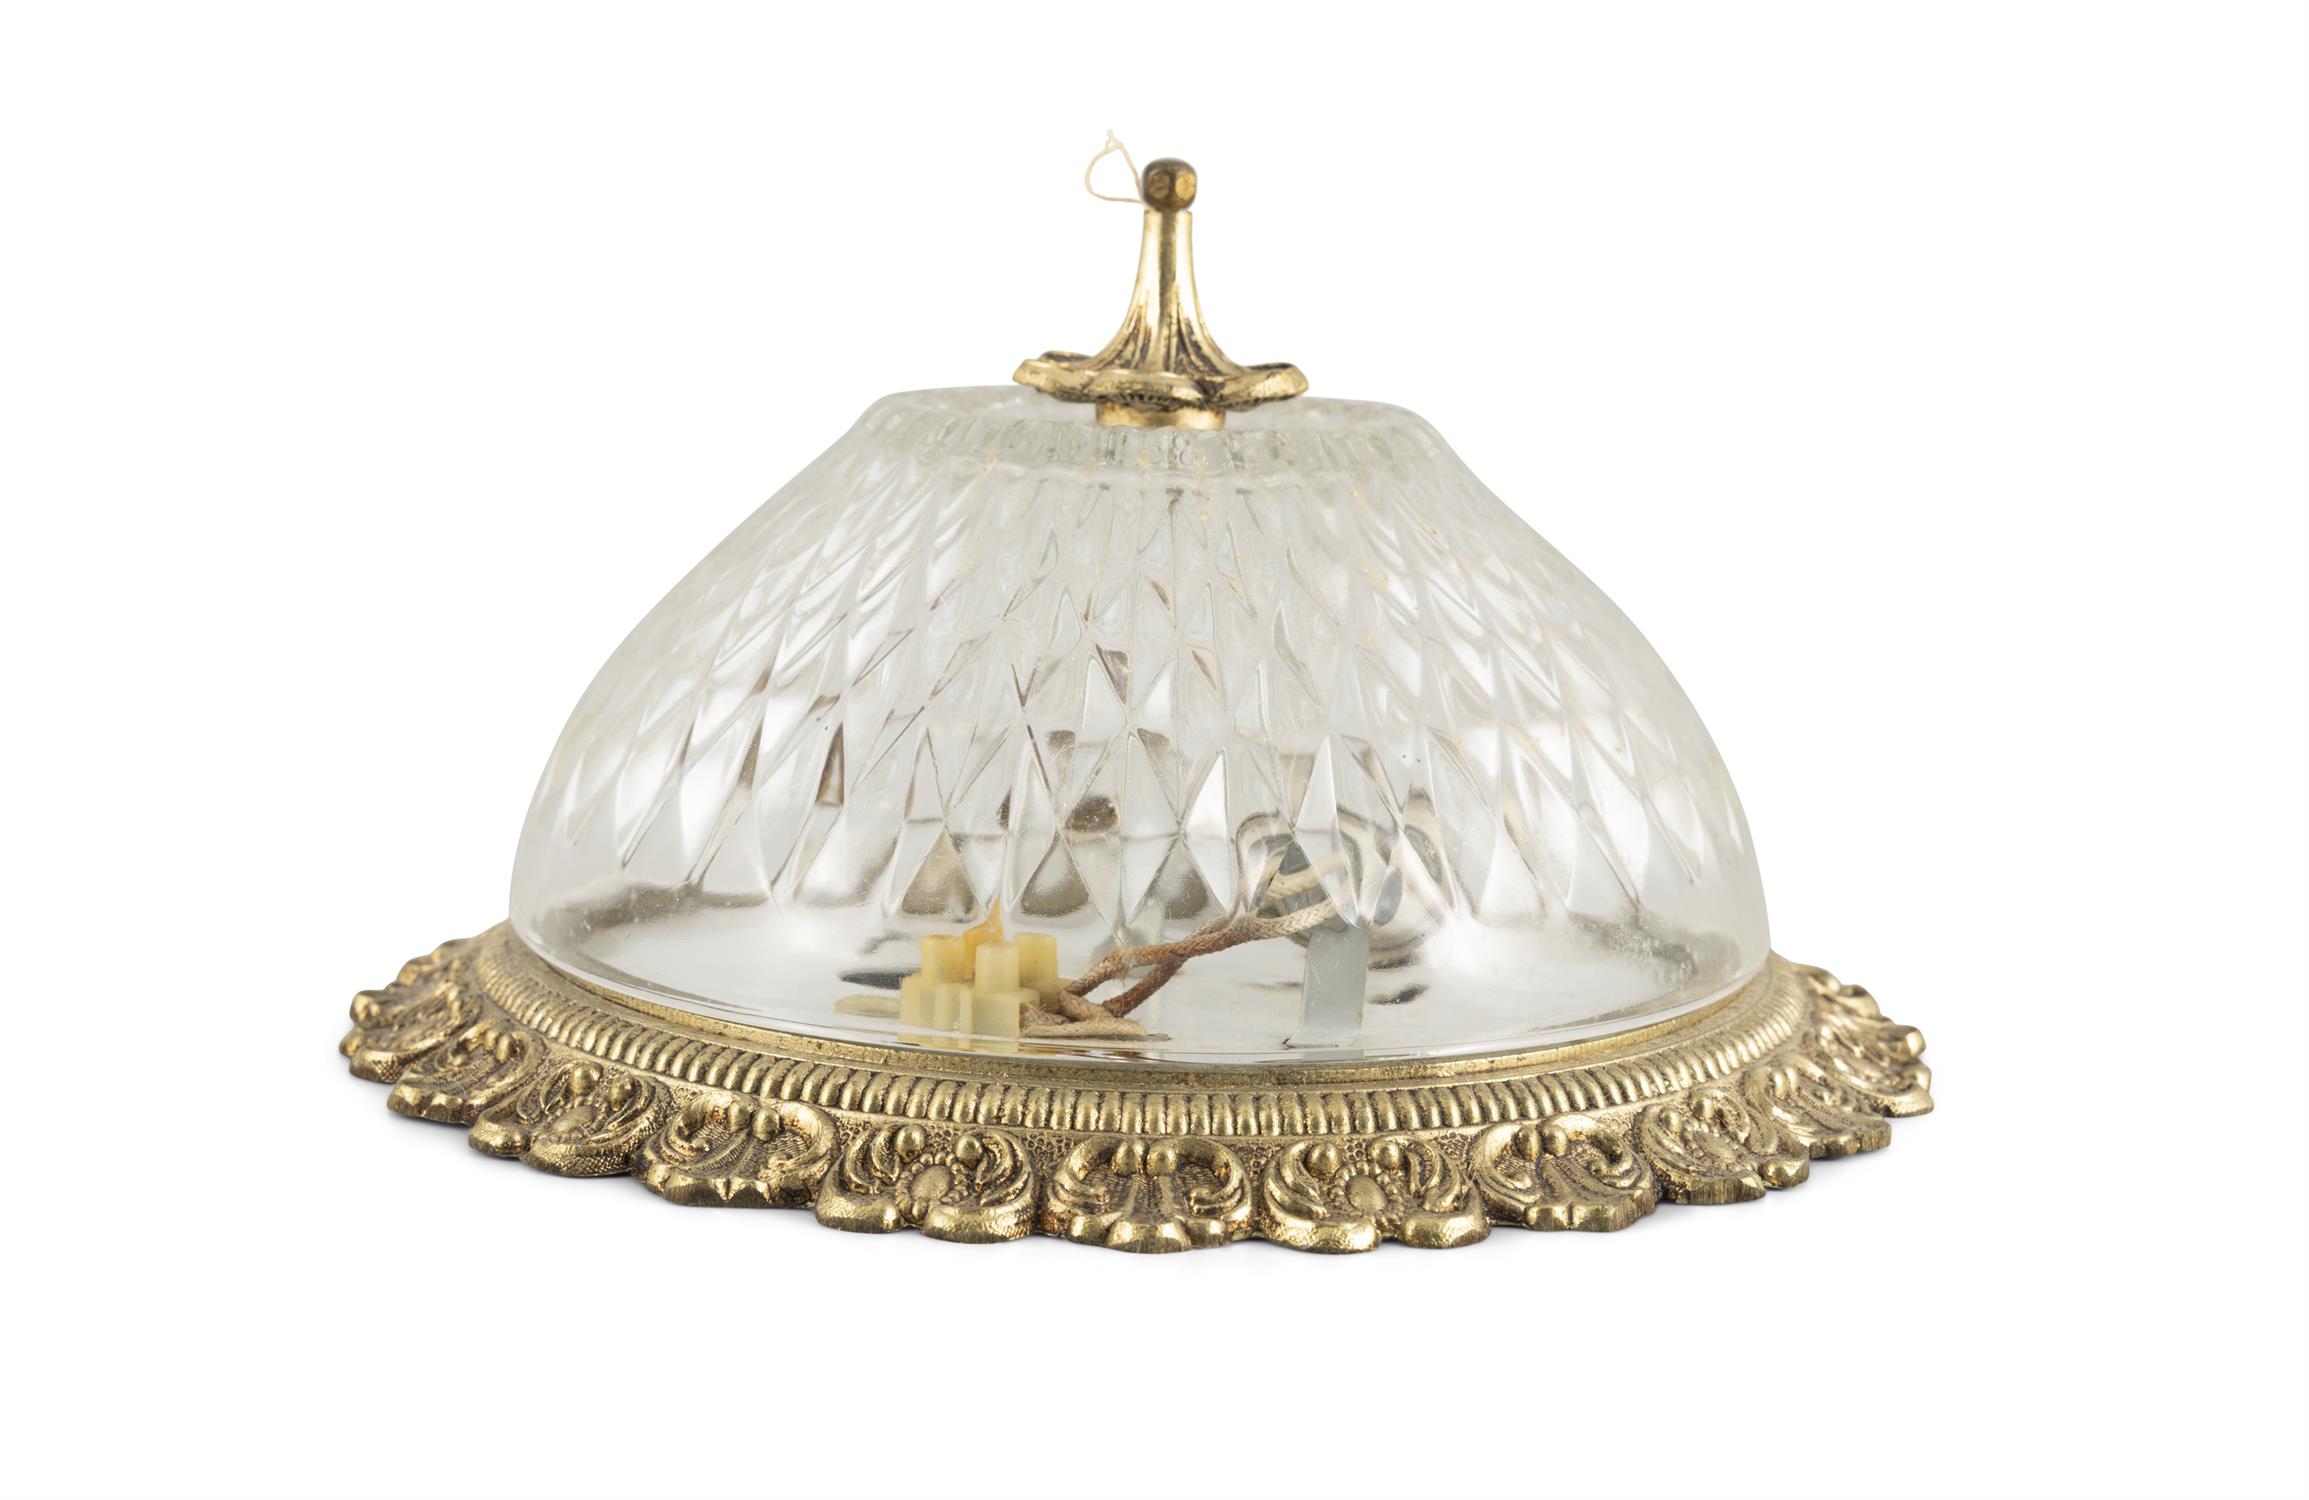 A PAIR OF CIRCULAR MOULDED GLASS BOWL-SHAPED CEILING LIGHTS, with gilt metal mounts, - Image 2 of 3